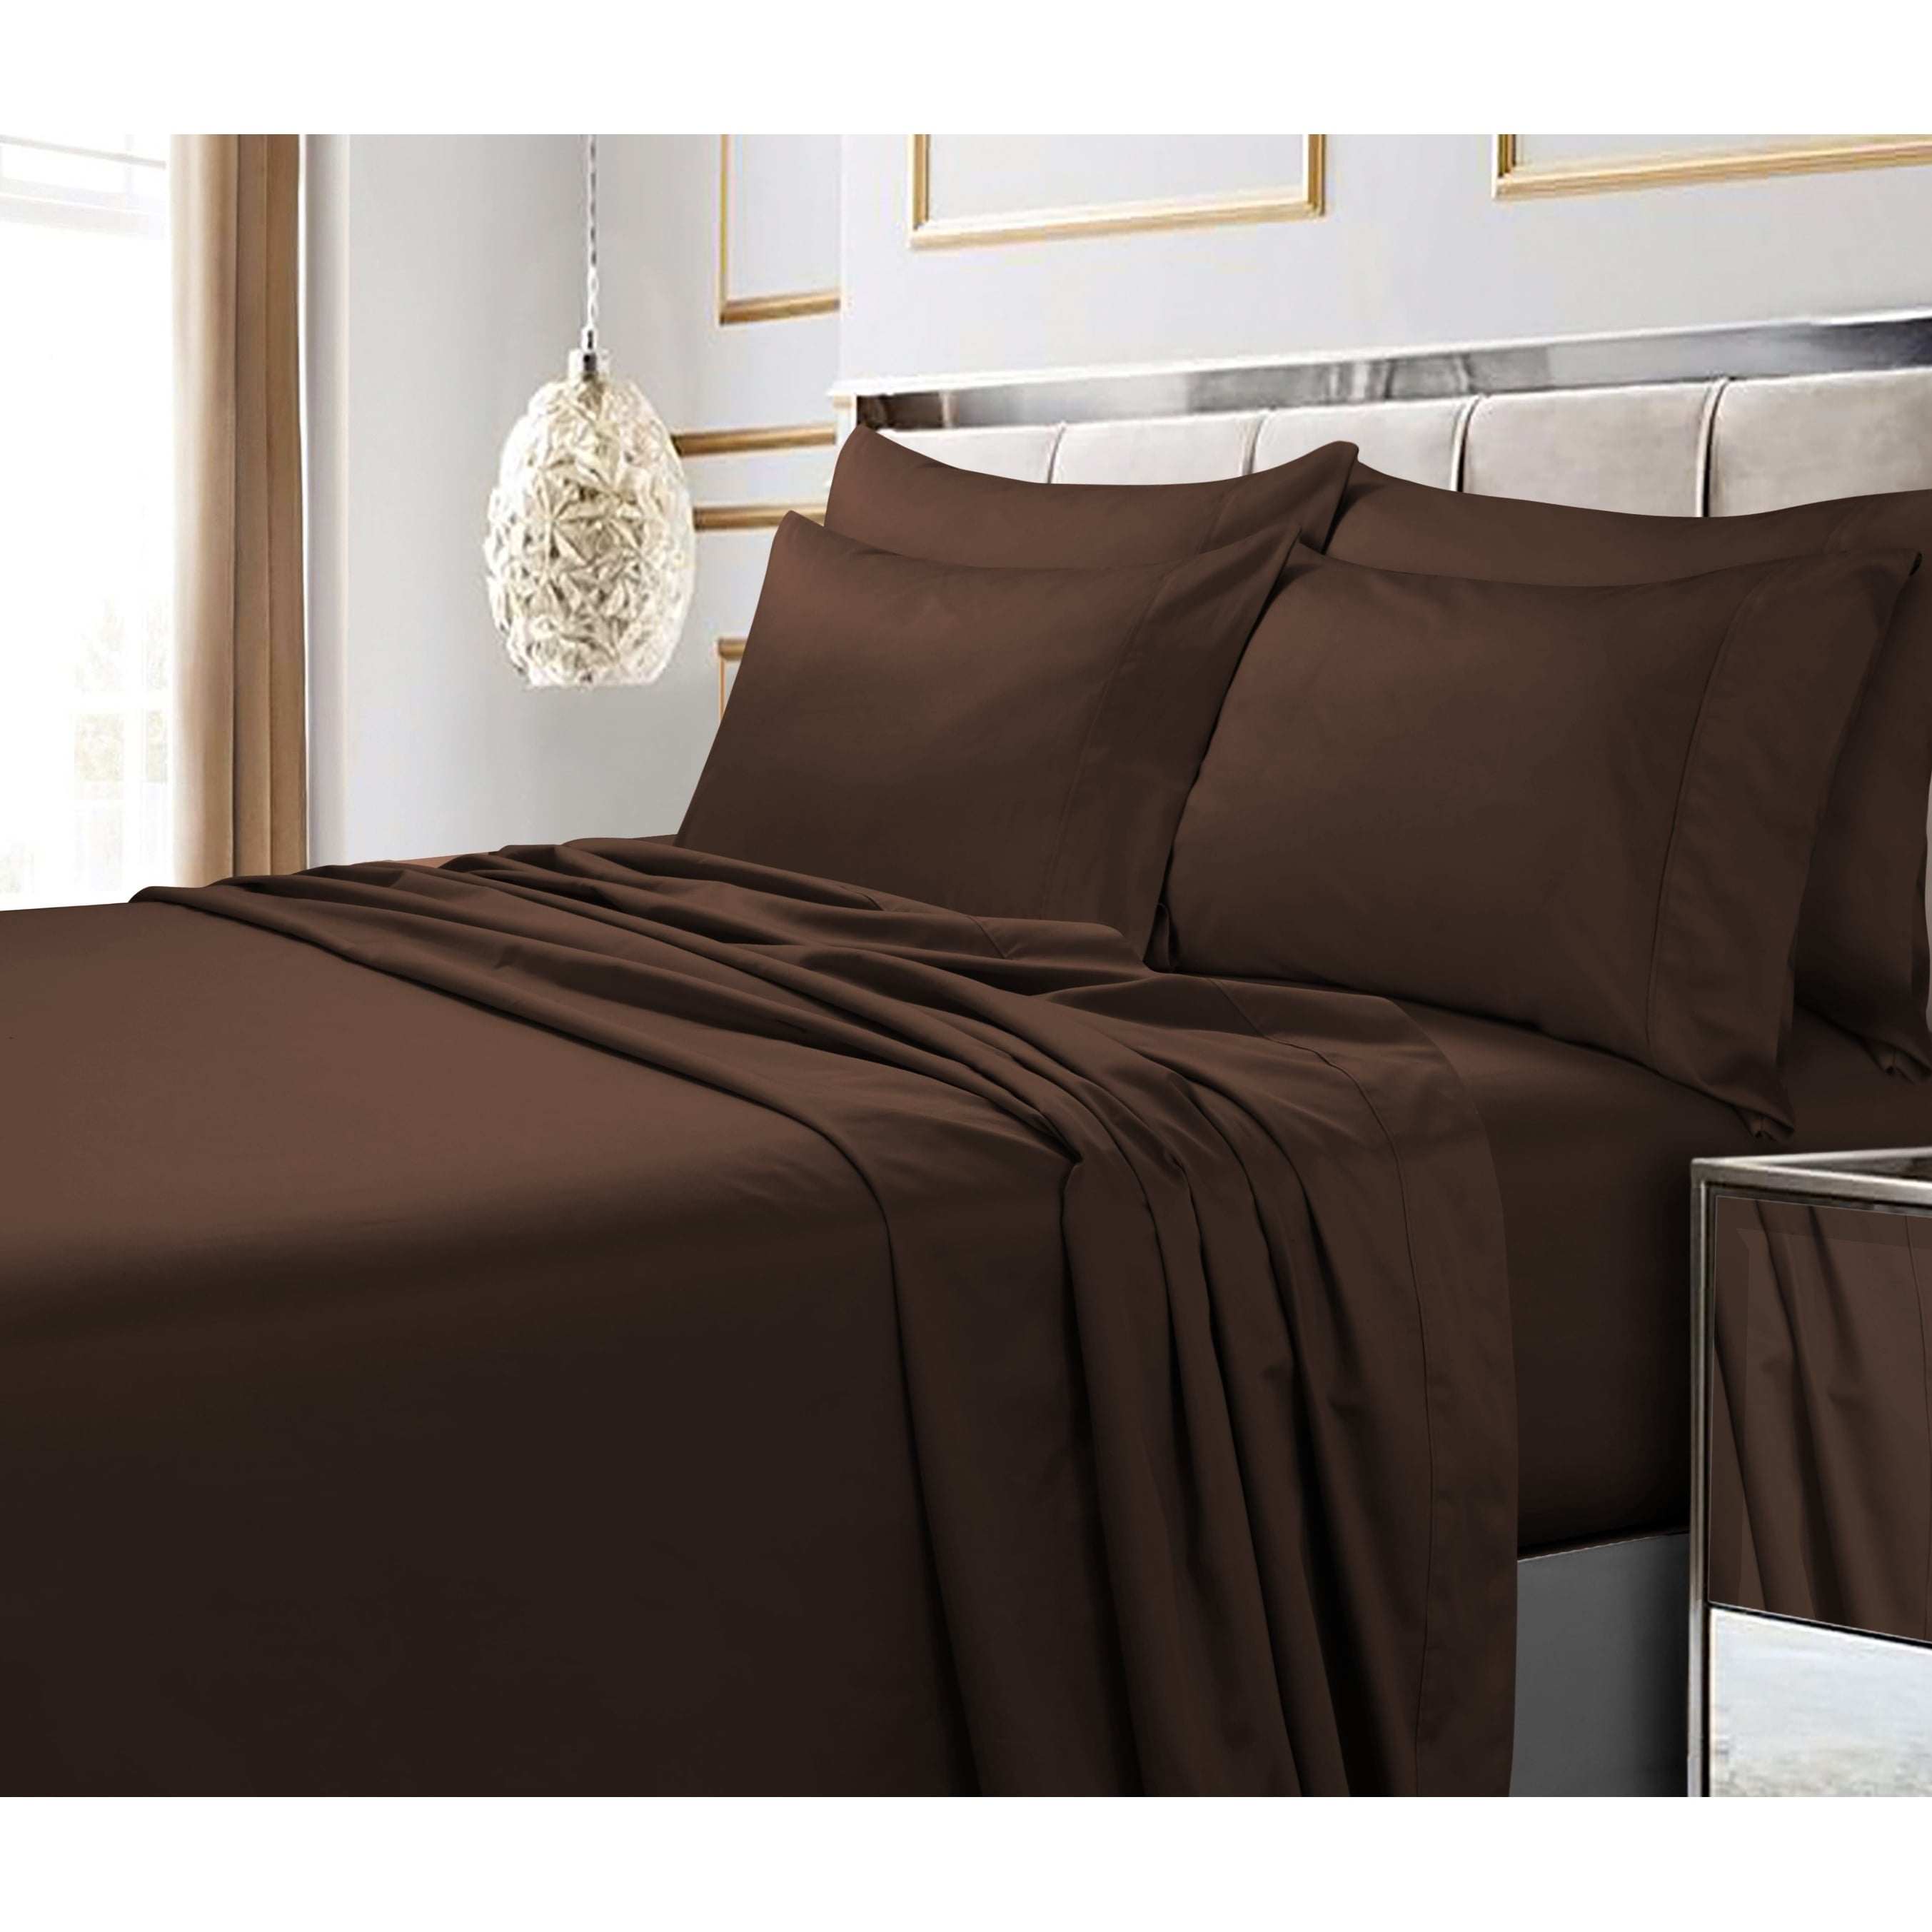 Details about   1200 TC Egyptian Cotton 3 pc Deep Pocket Fitted Sheet Set Only Cal-King Size 